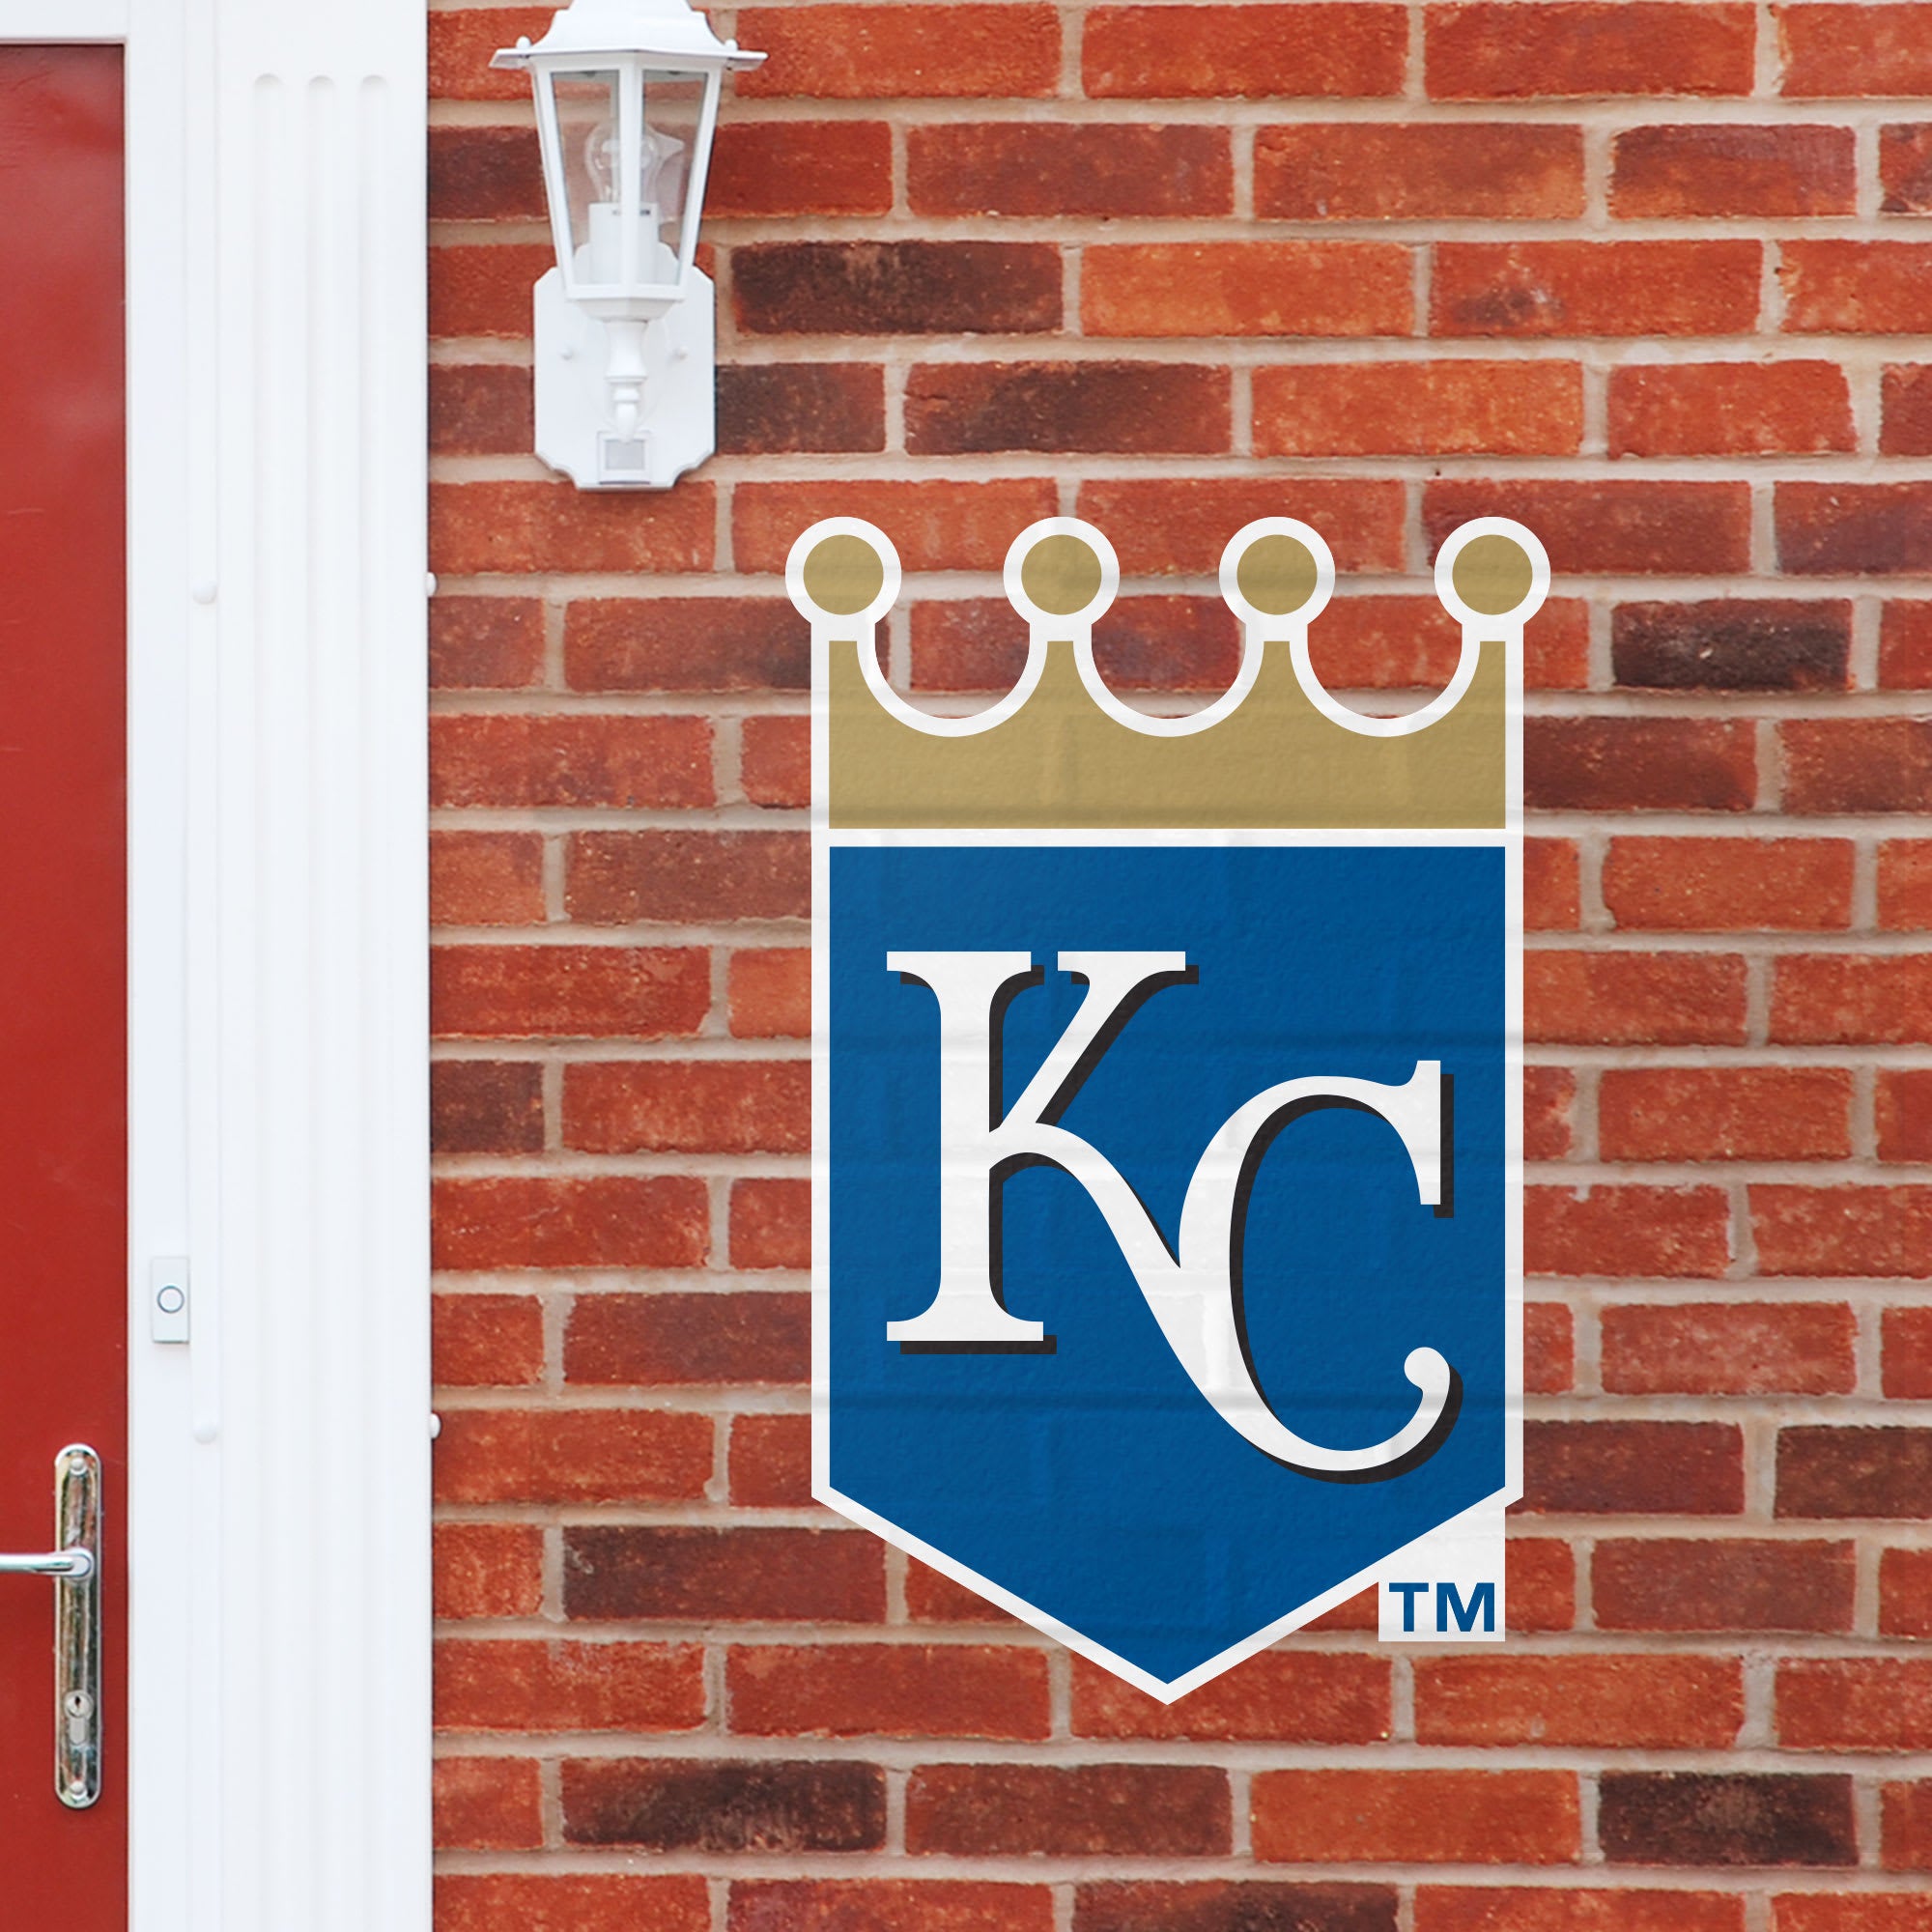 Kansas City Royals: Logo - Officially Licensed MLB Outdoor Graphic Giant Logo (30"W x 30"H) by Fathead | Wood/Aluminum